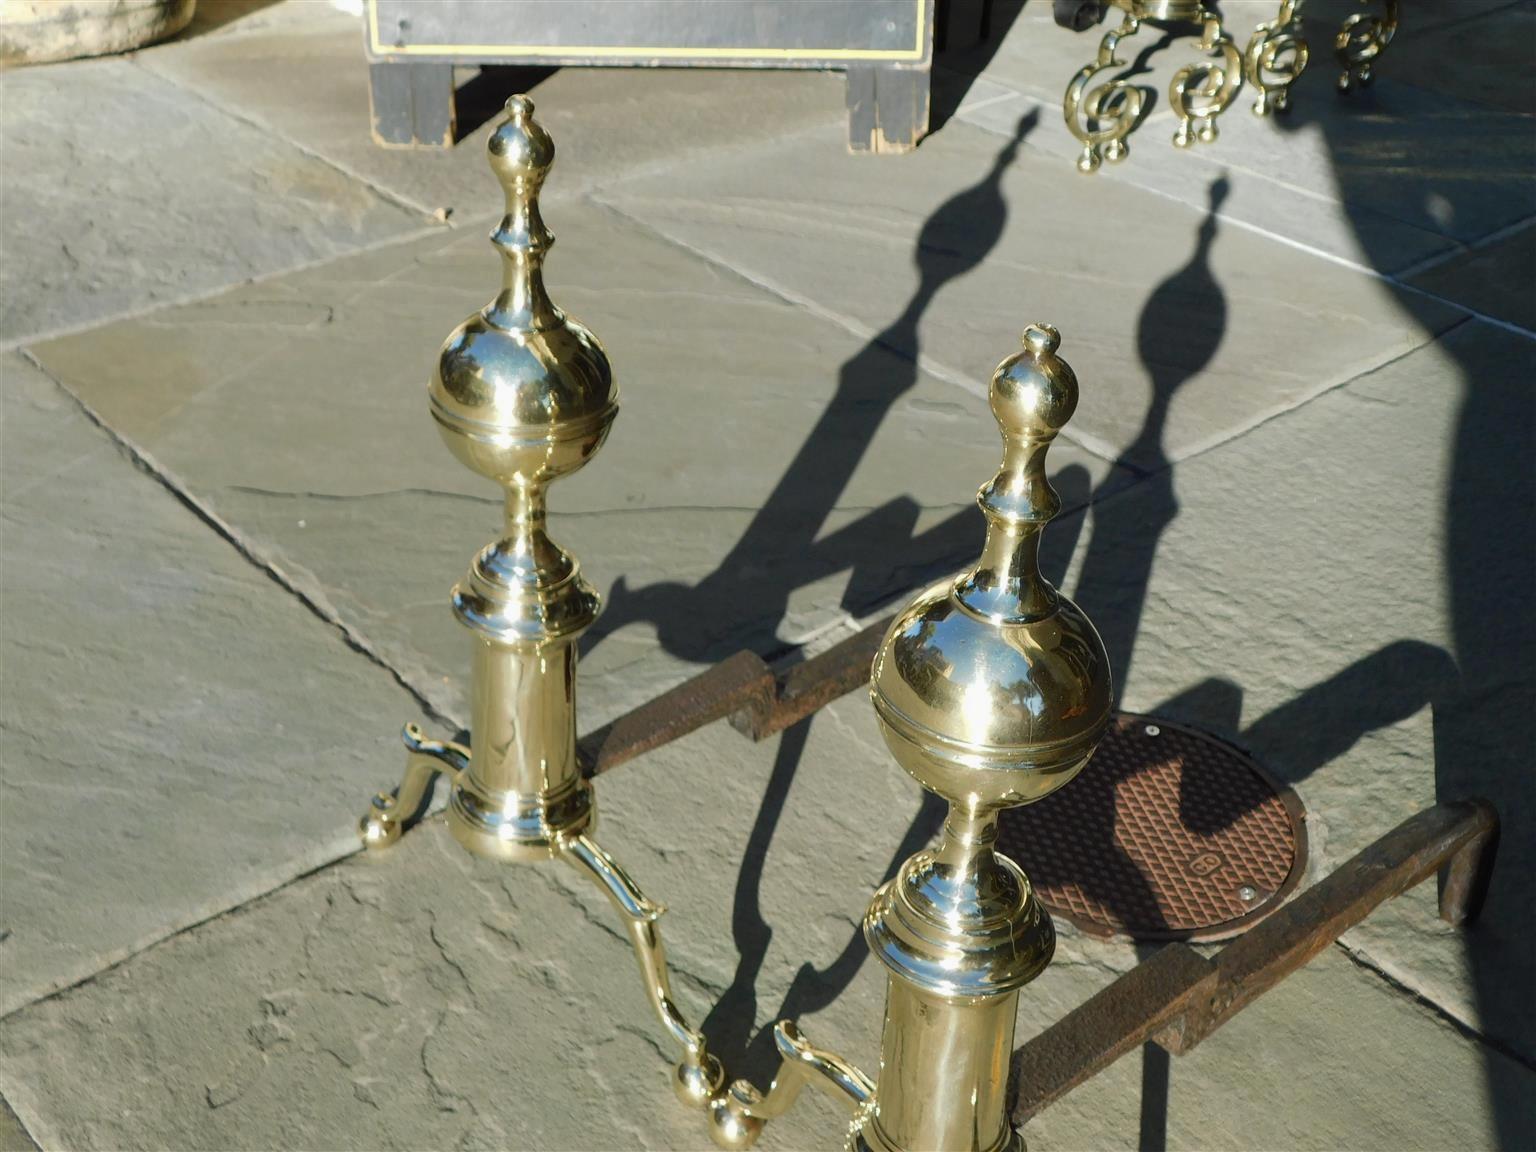 Cast Pair of American Brass Ball Finial Andirons with Spur Legs & Ball Feet, C. 1810 For Sale